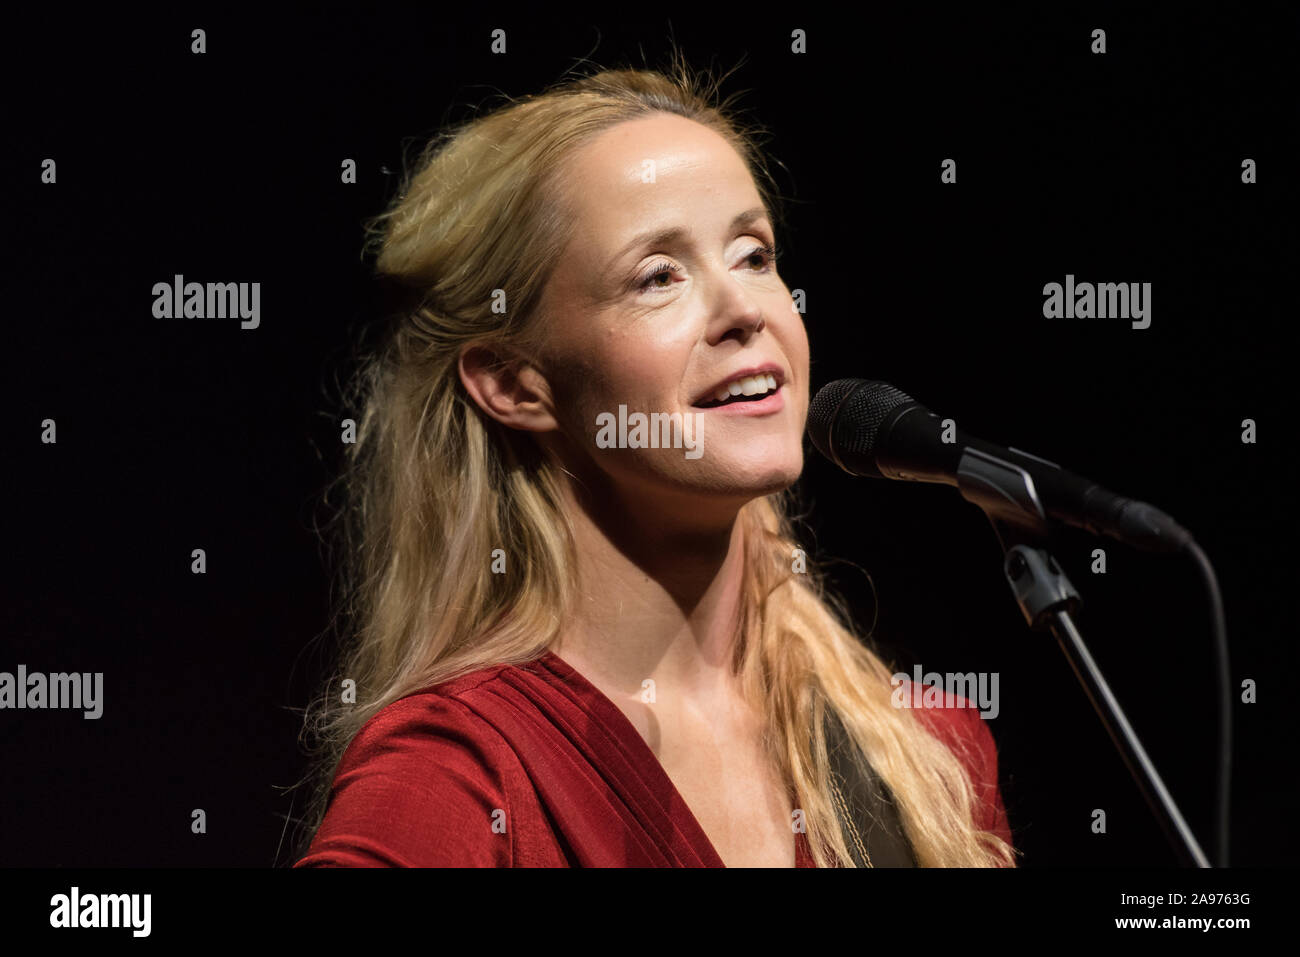 Denmark. 10th, November 2019. The Danish singer, songwriter and Tina Dickow performs a live concert at Operaen in Copenhagen. (Photo credit: Photo - Bo Kallberg Stock Photo - Alamy